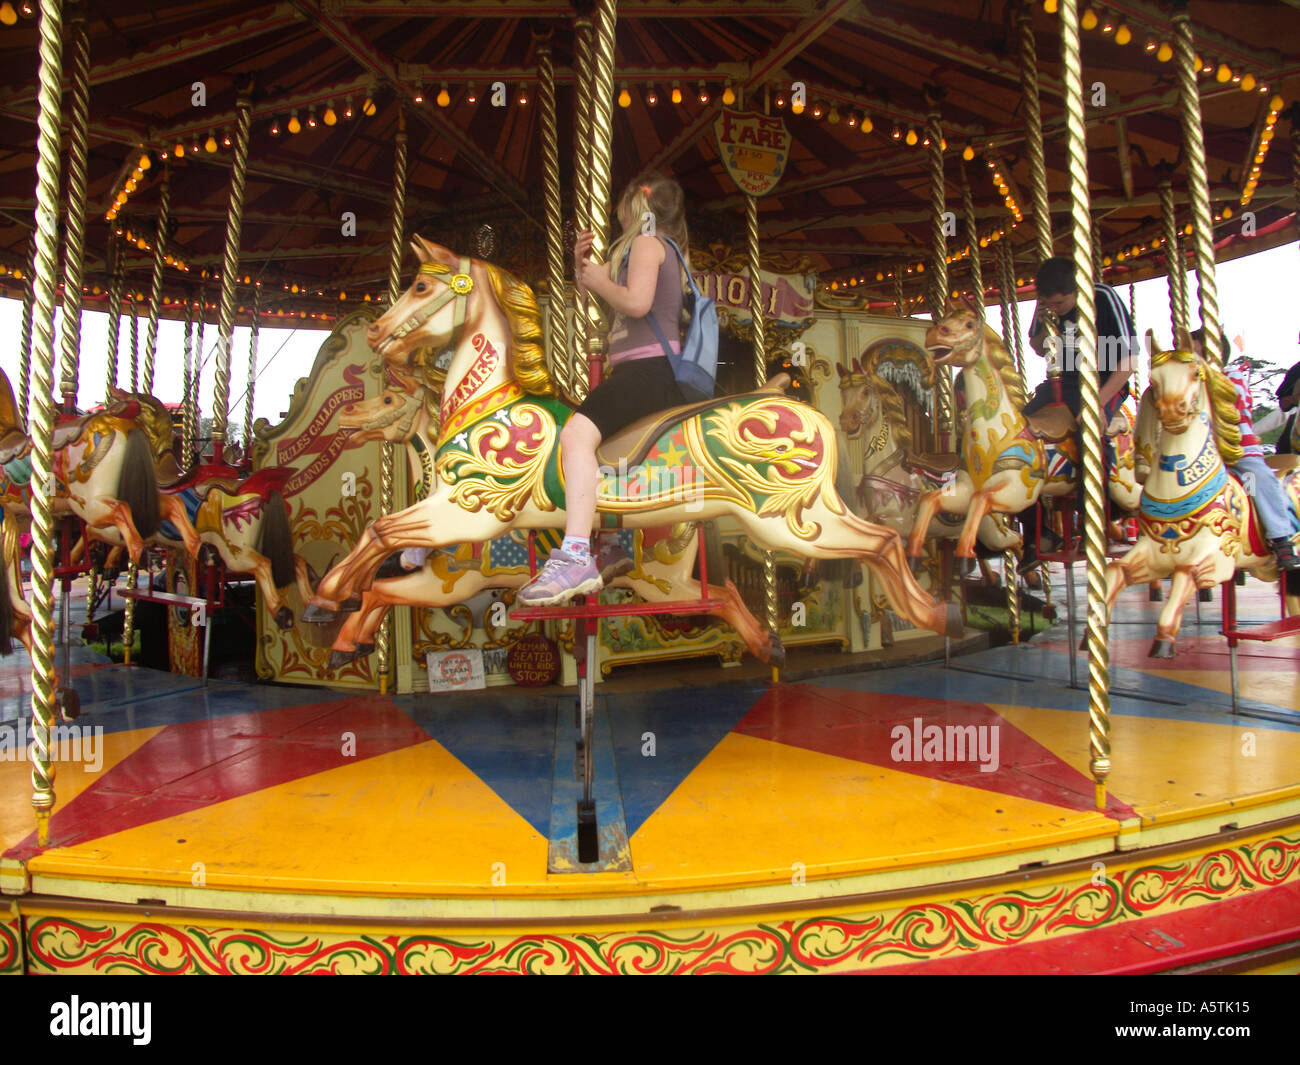 Children riding old fashioned roundabout horse carousel merry go round Stock Photo